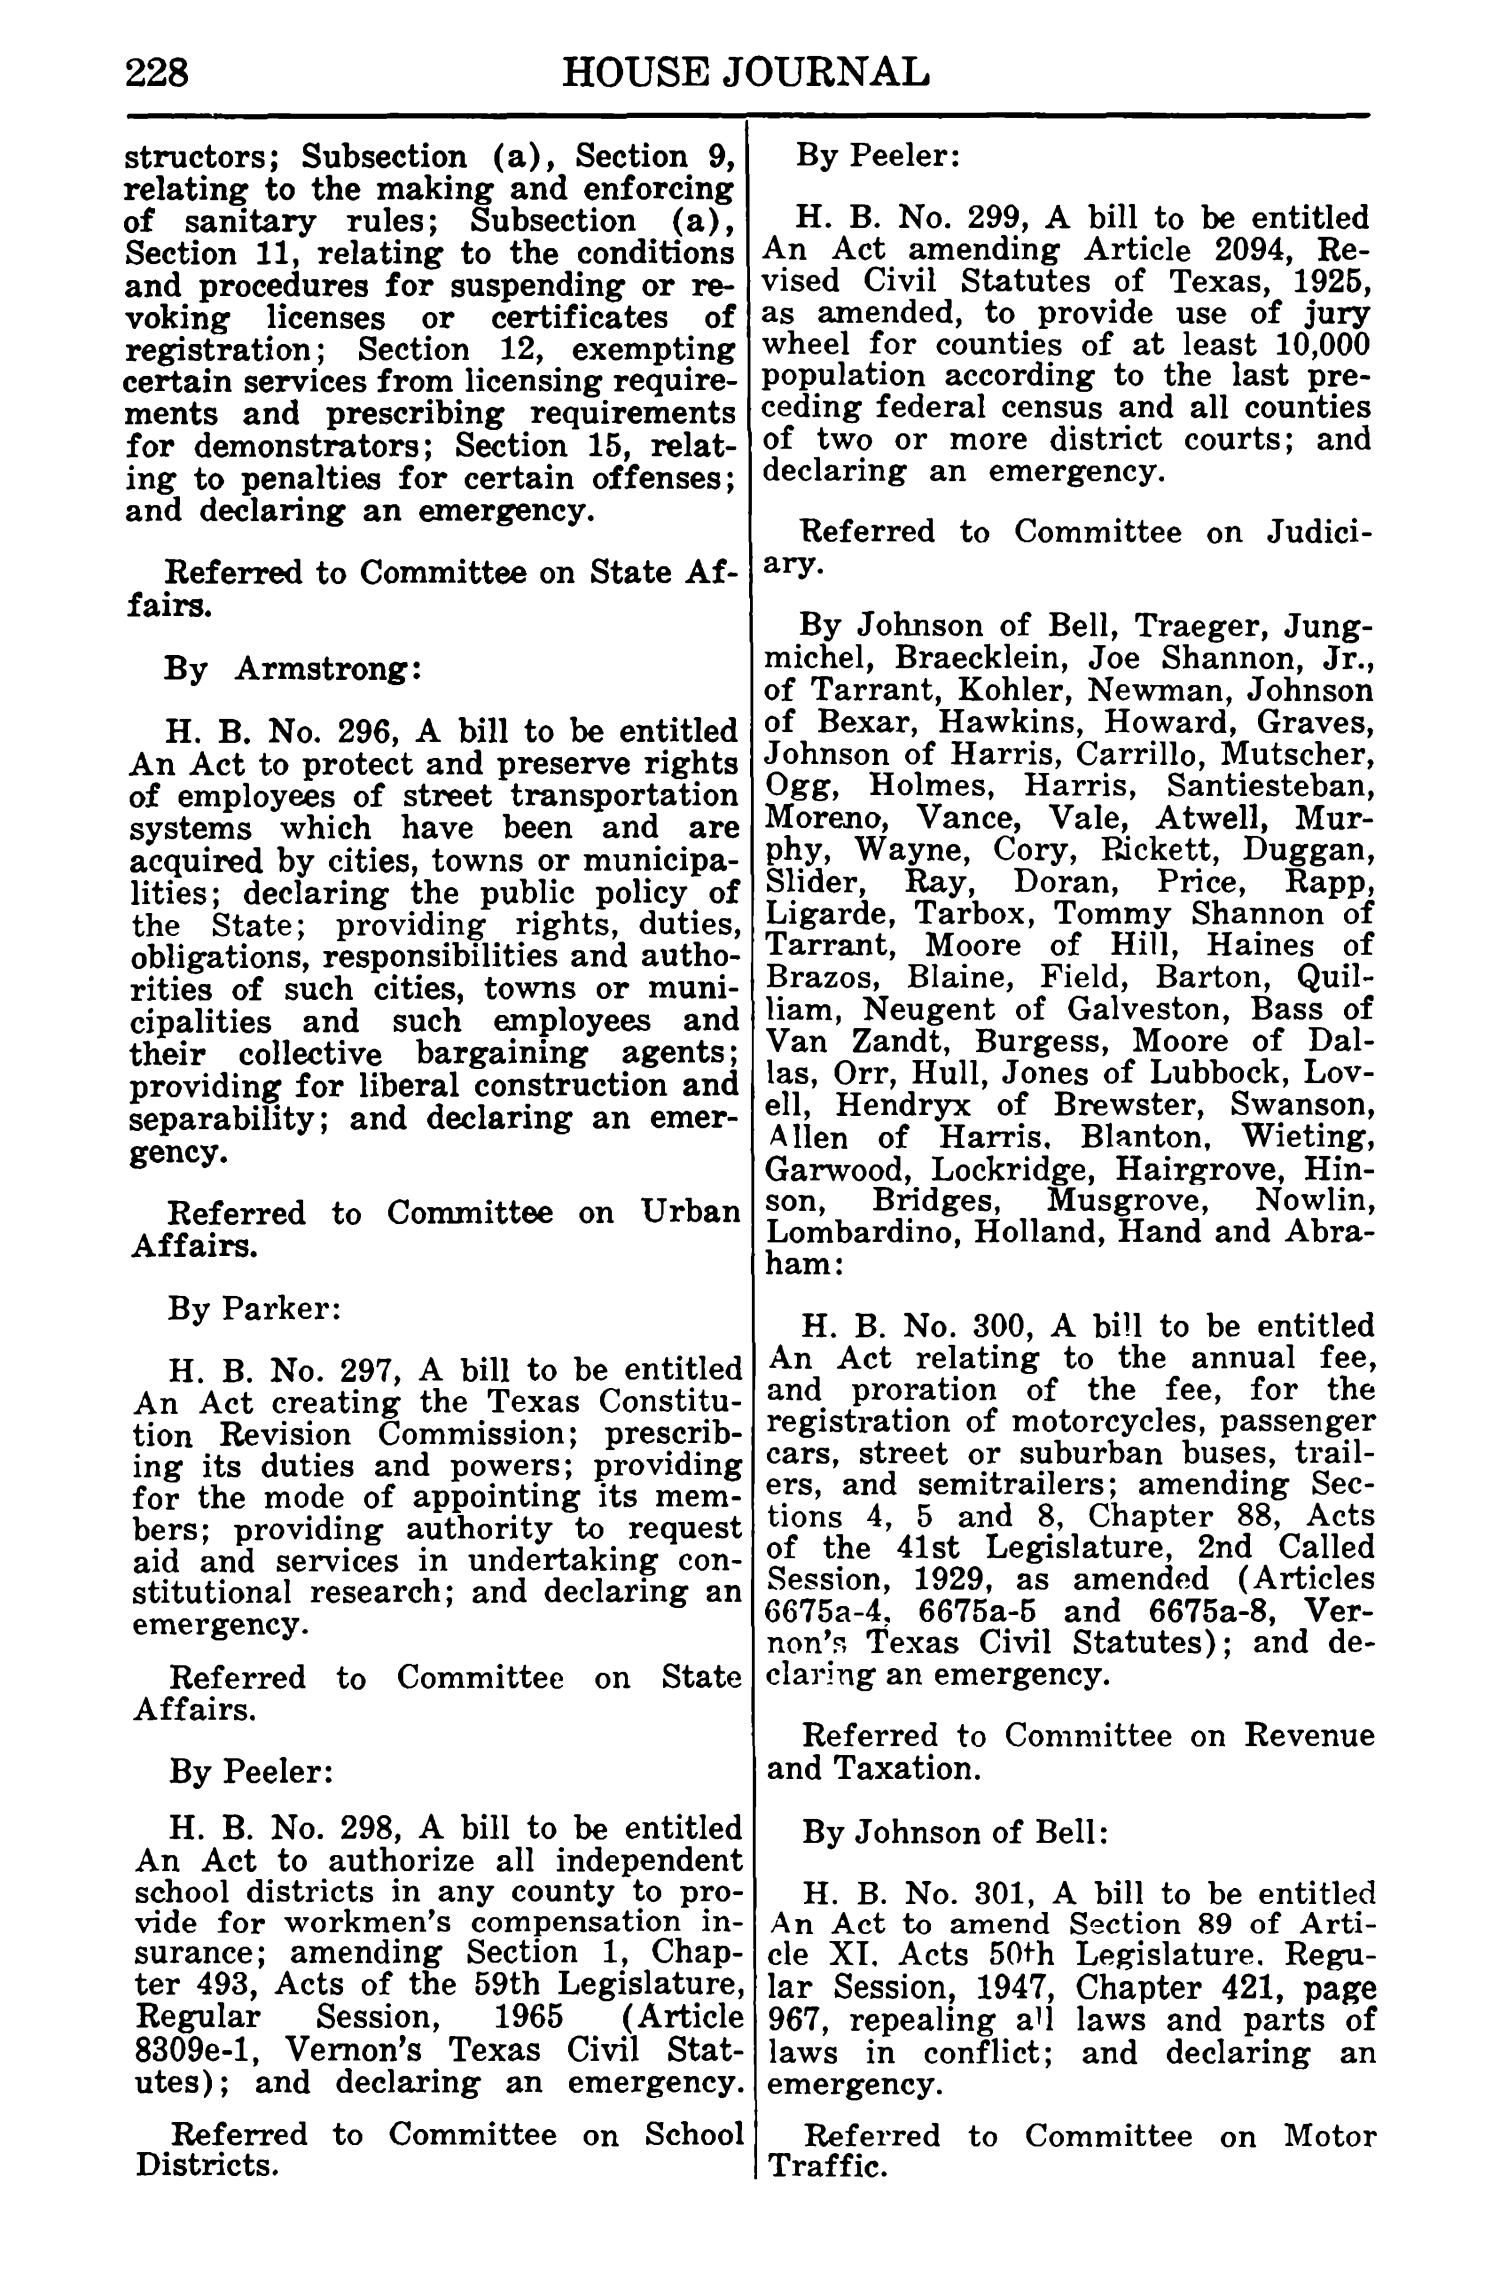 Journal of the House of Representatives of the Regular Session of the Sixtieth Legislature of the State of Texas, Volume 1
                                                
                                                    228
                                                